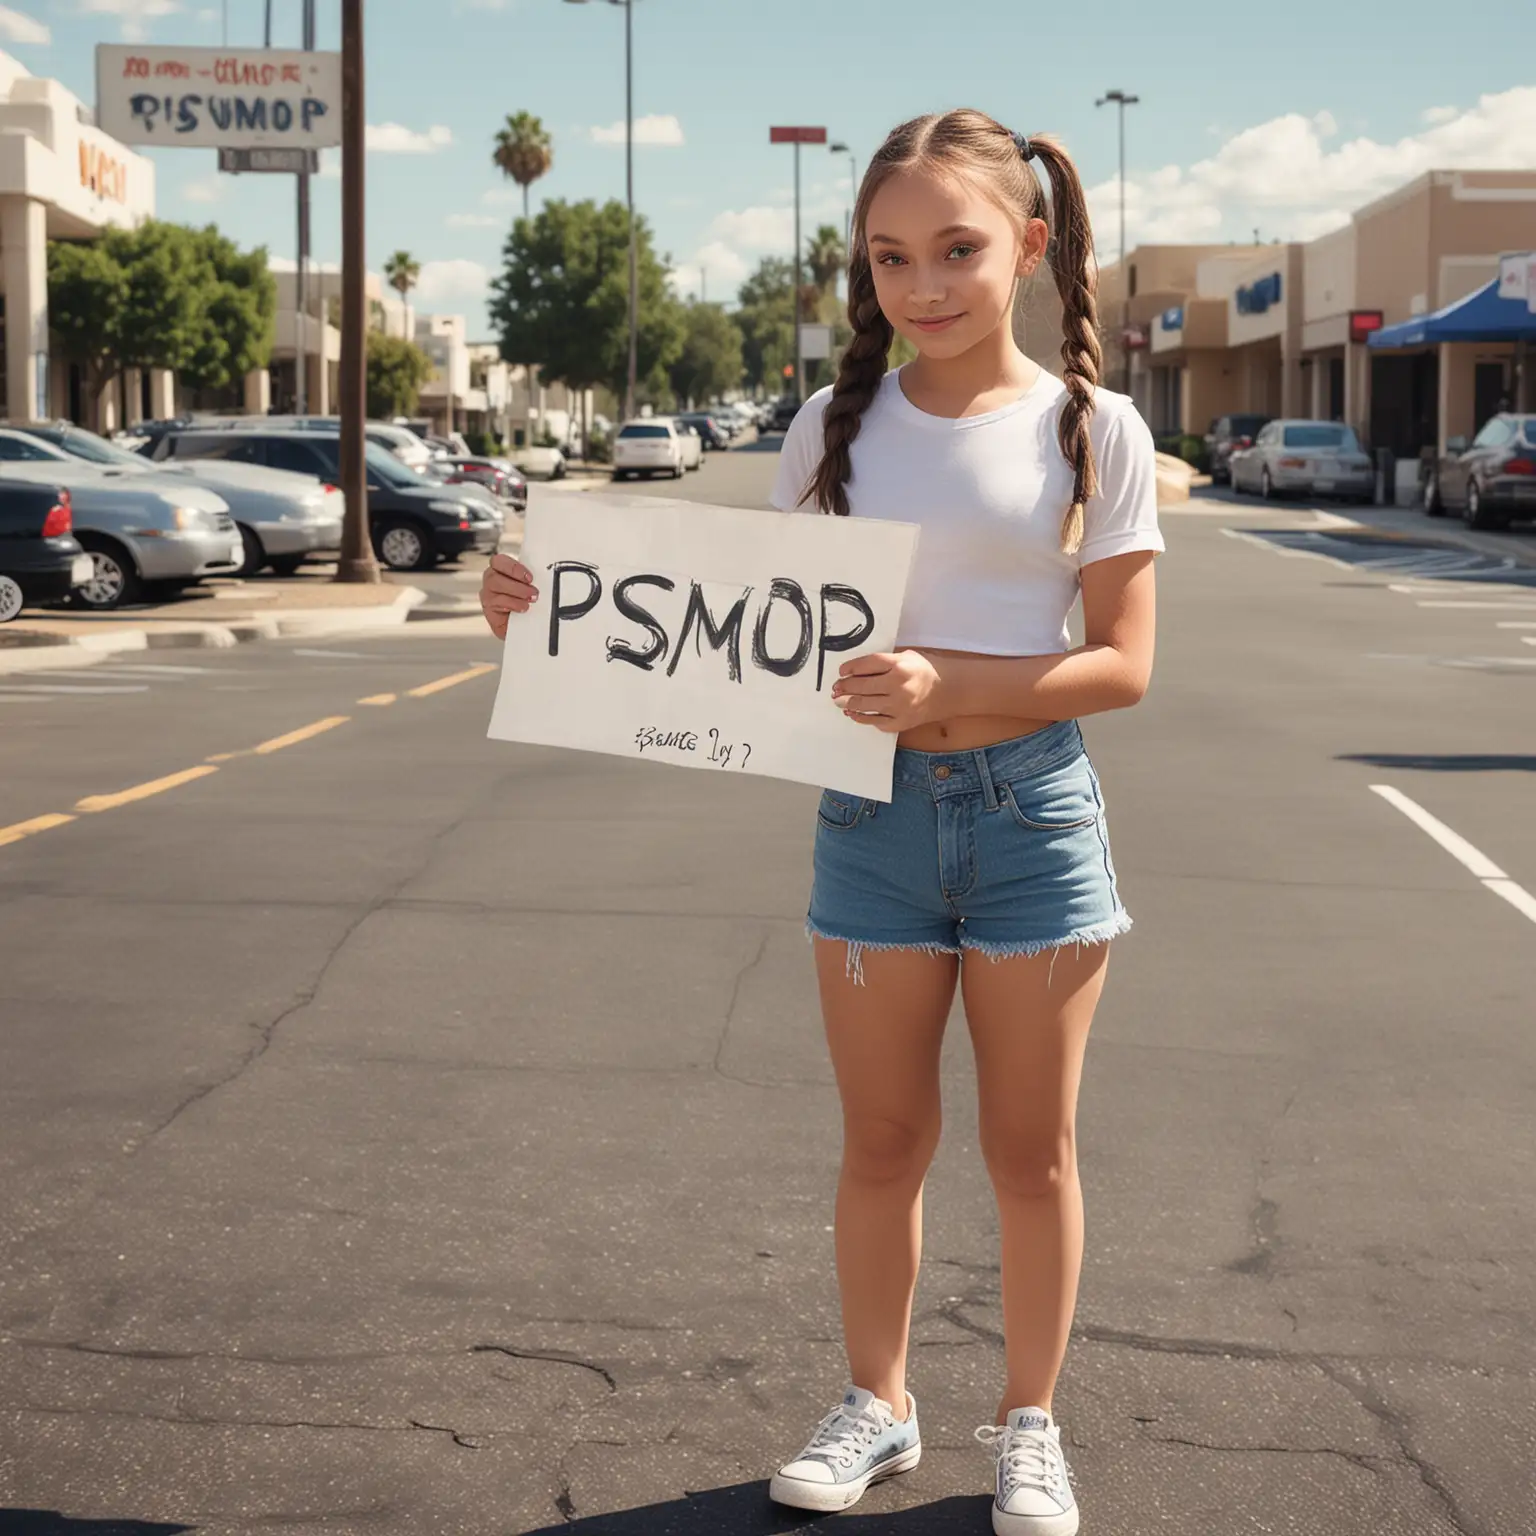 Young Maddie Ziegler in Denim Shorts Holding Pismop Sign on Hot Summer Parking Lot